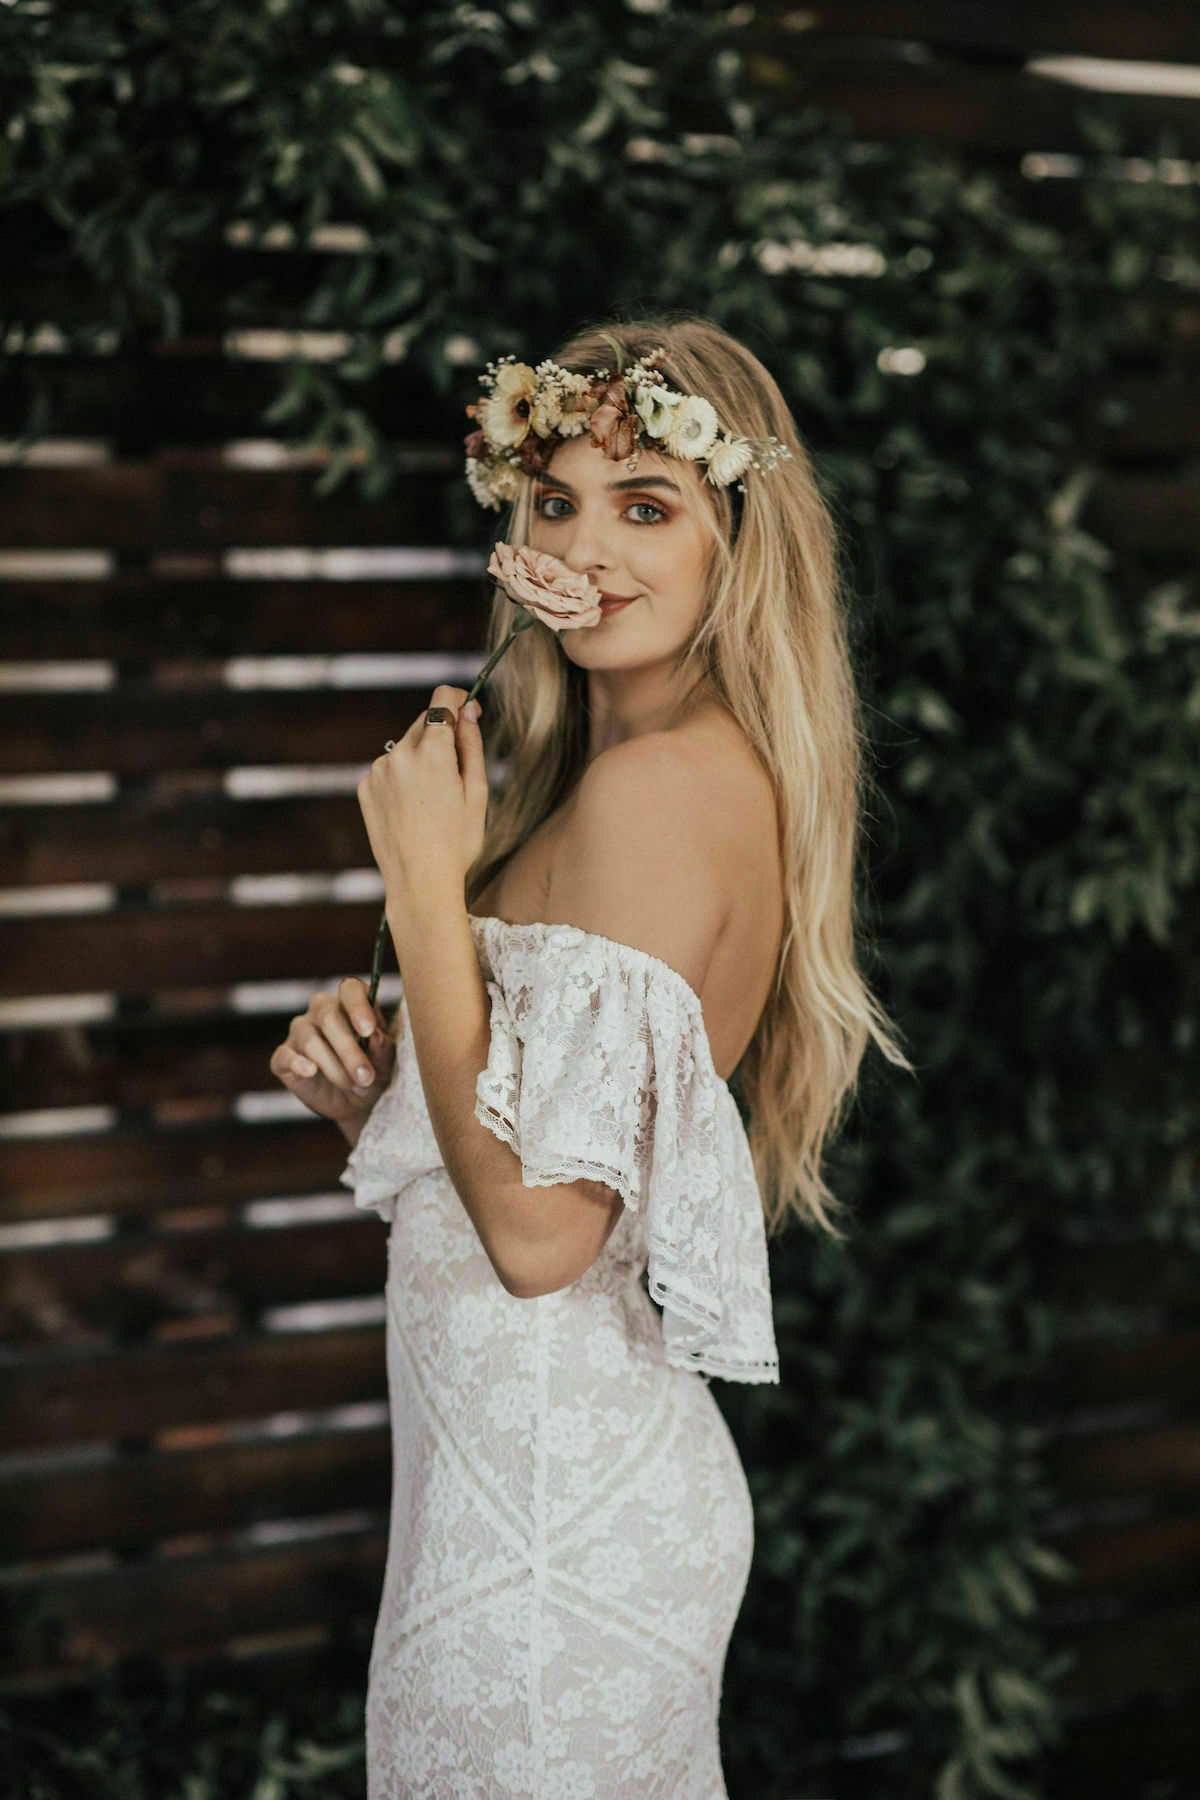 Lizzy-off-the-shoulder-stretch-lace-wedding-dress-off-white-inspo-for-boho-bride